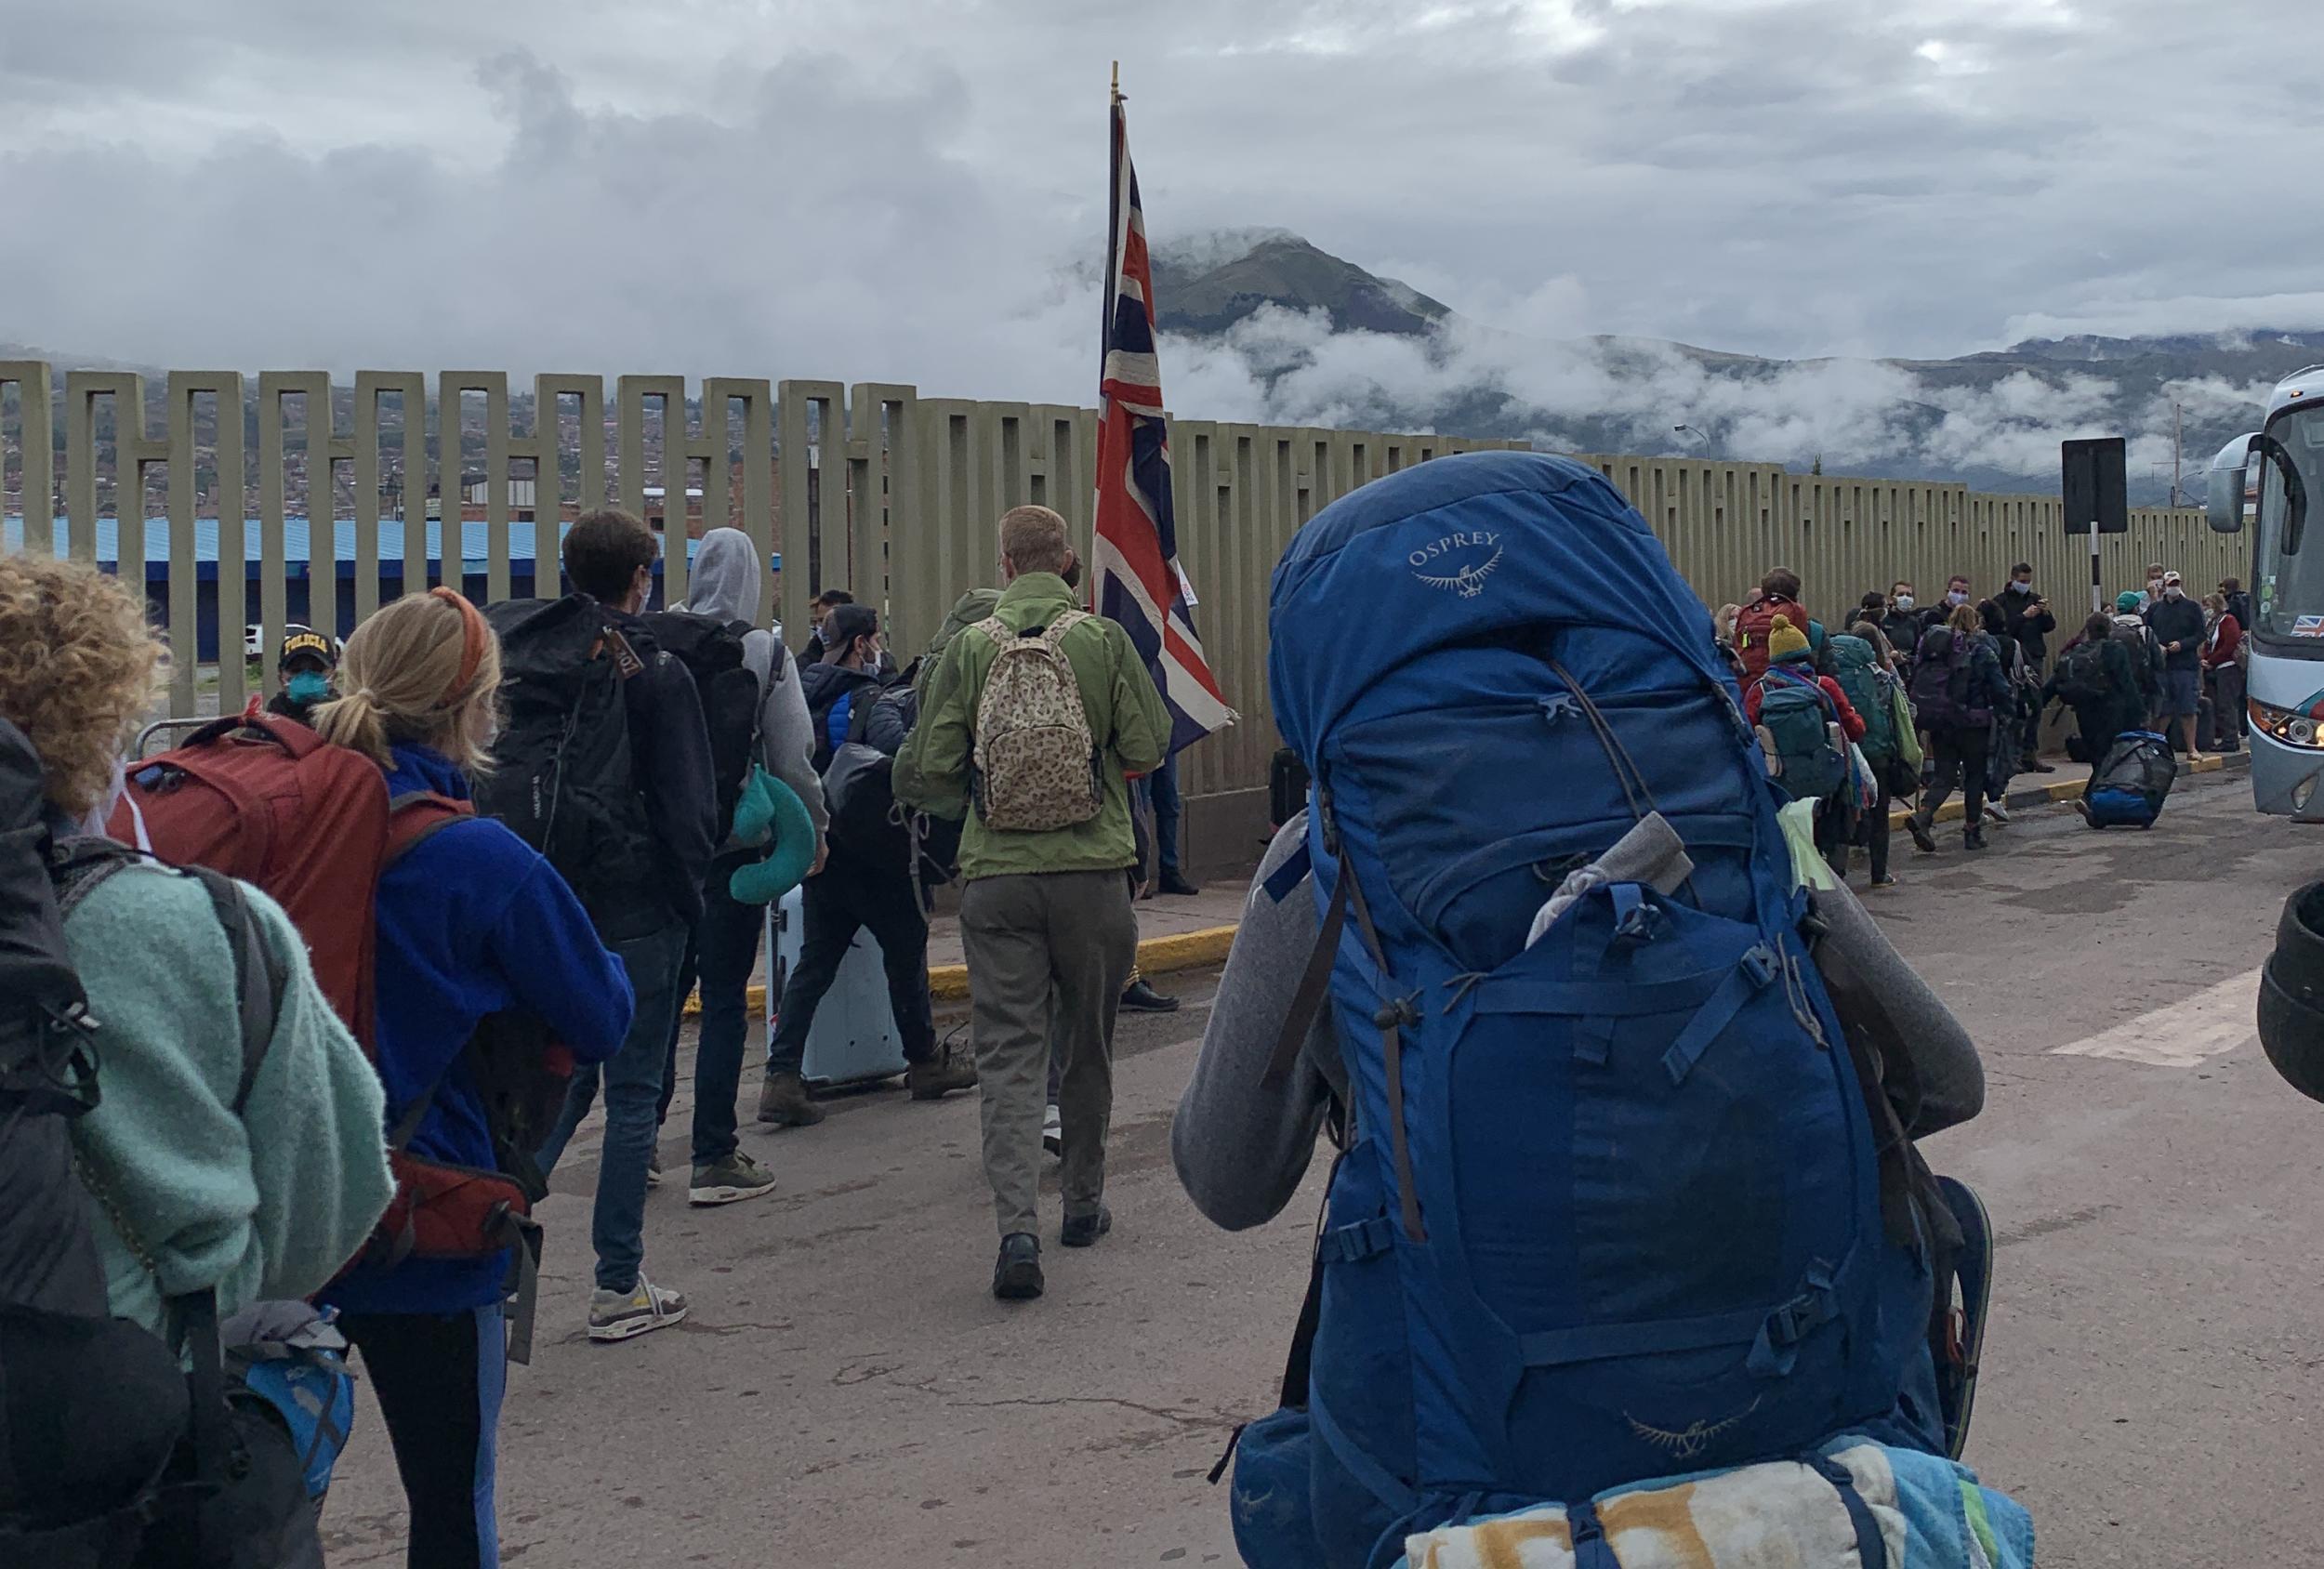 Homeward bound: British travellers from Cusco, Peru, on the first stage of their journey back to the UK